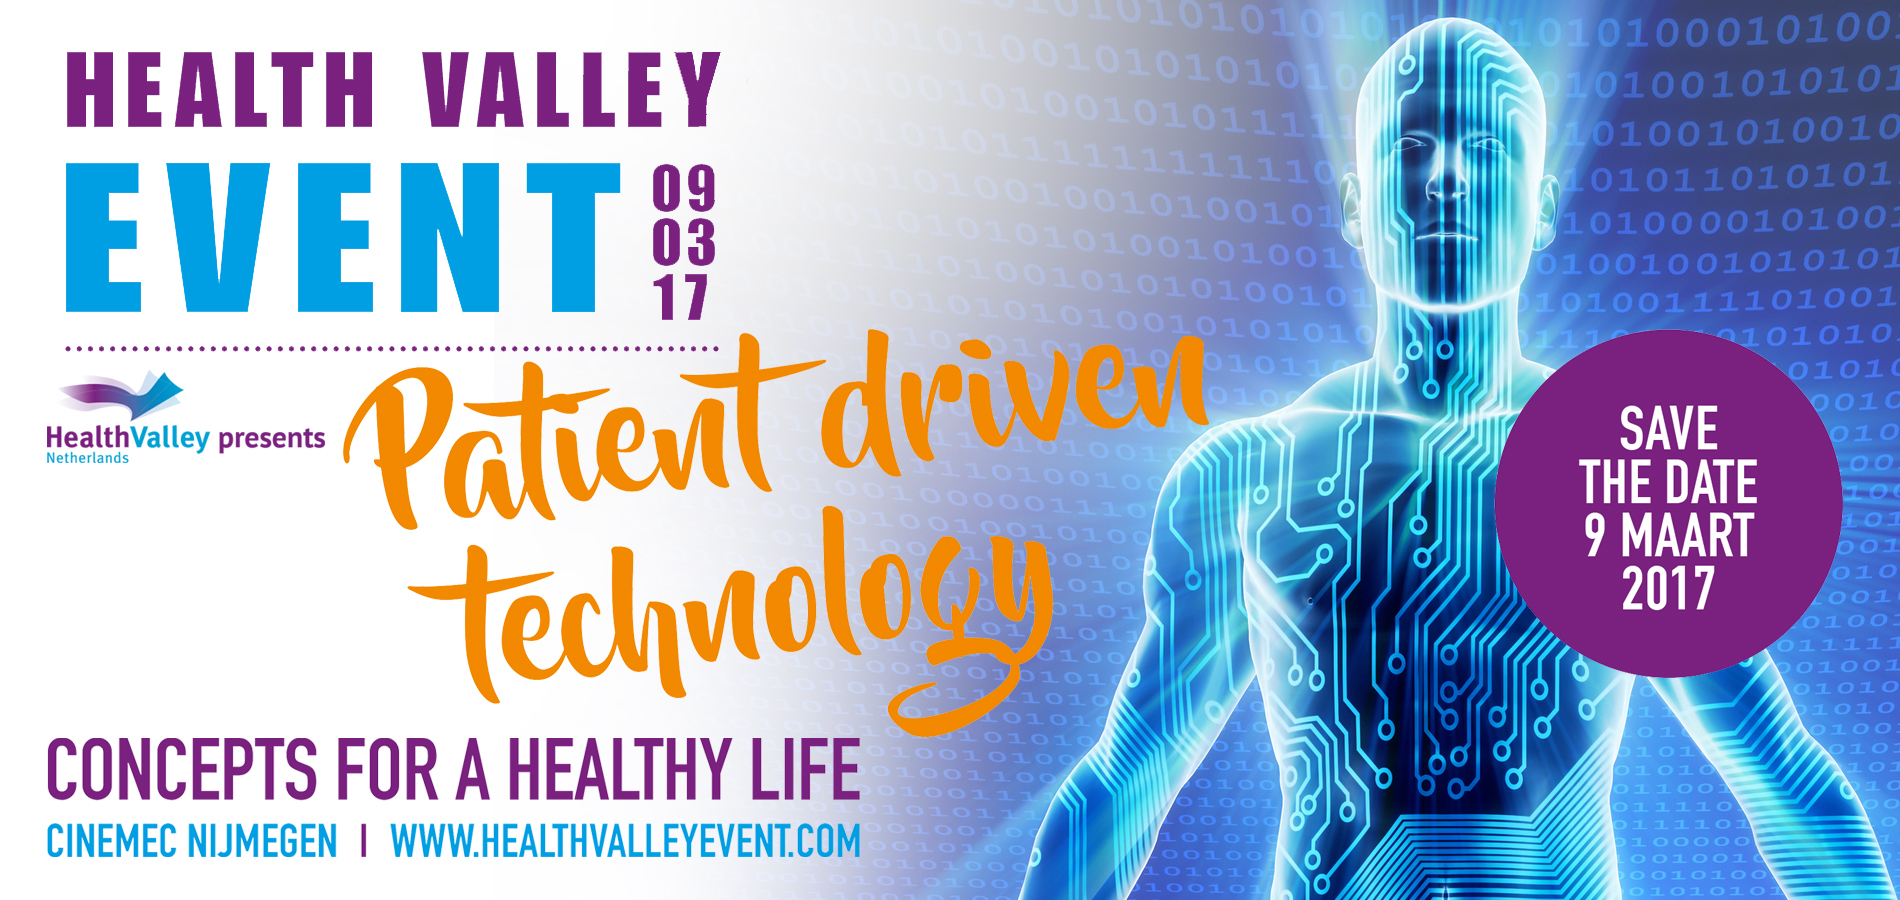 HEALTH VALLEY EVENT 2017: PATIENT DRIVEN TECHNOLOGY